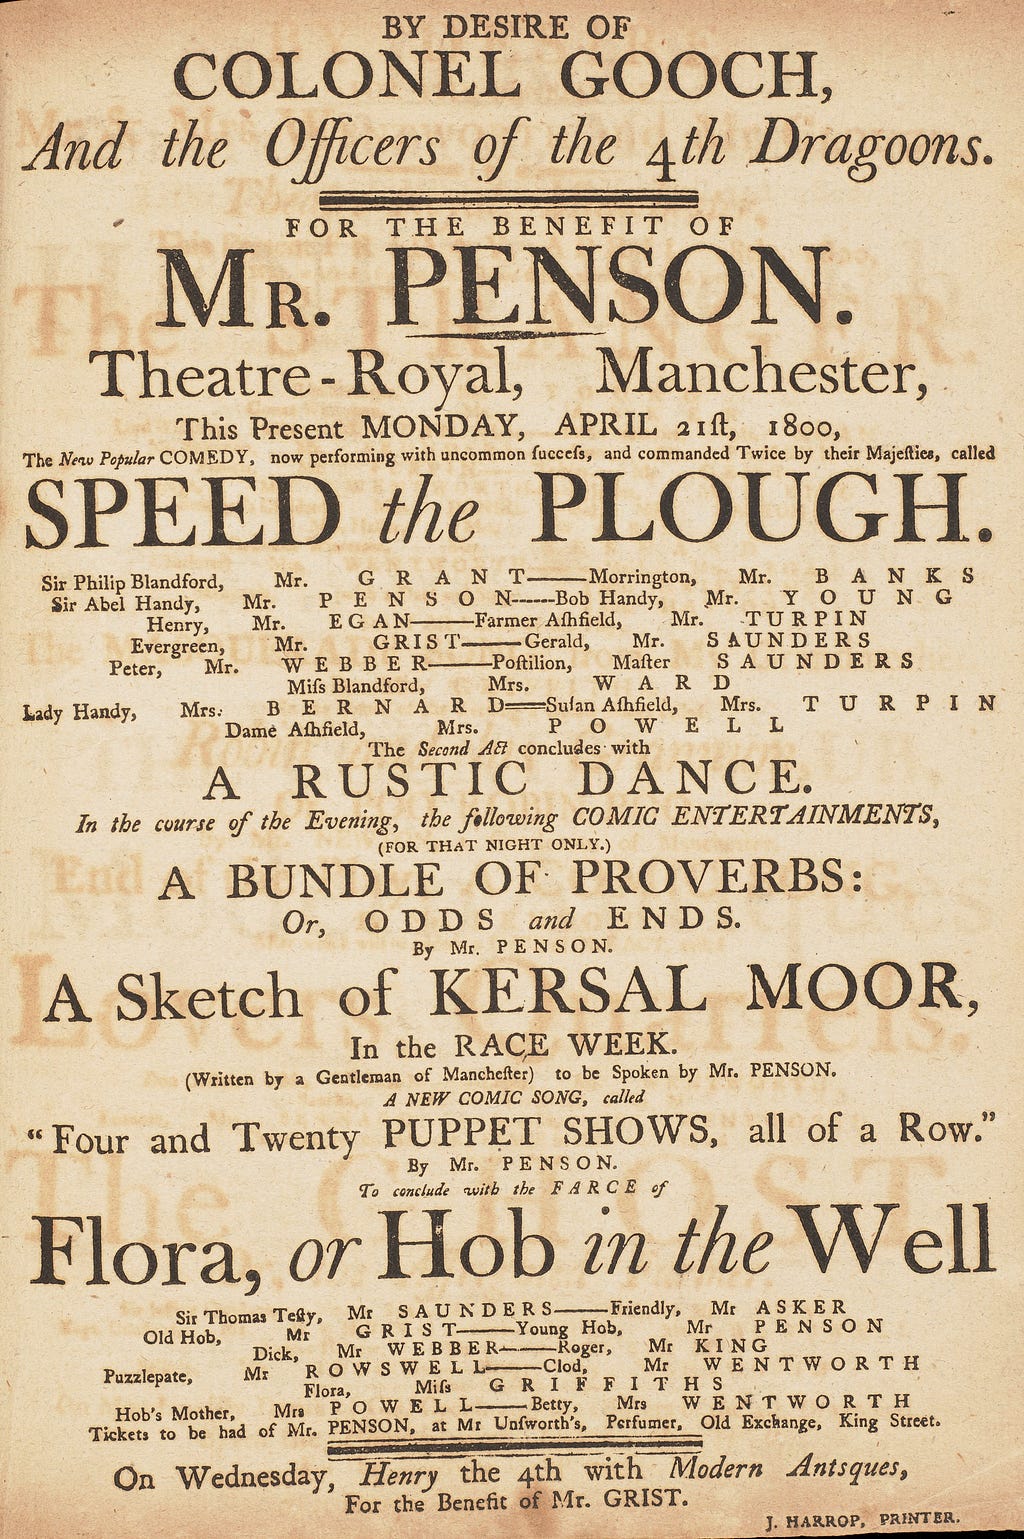 Theatre Royal Manchester playbill printed in varying sizes of upper and lowercase type for entertainments on 21 April 1800.